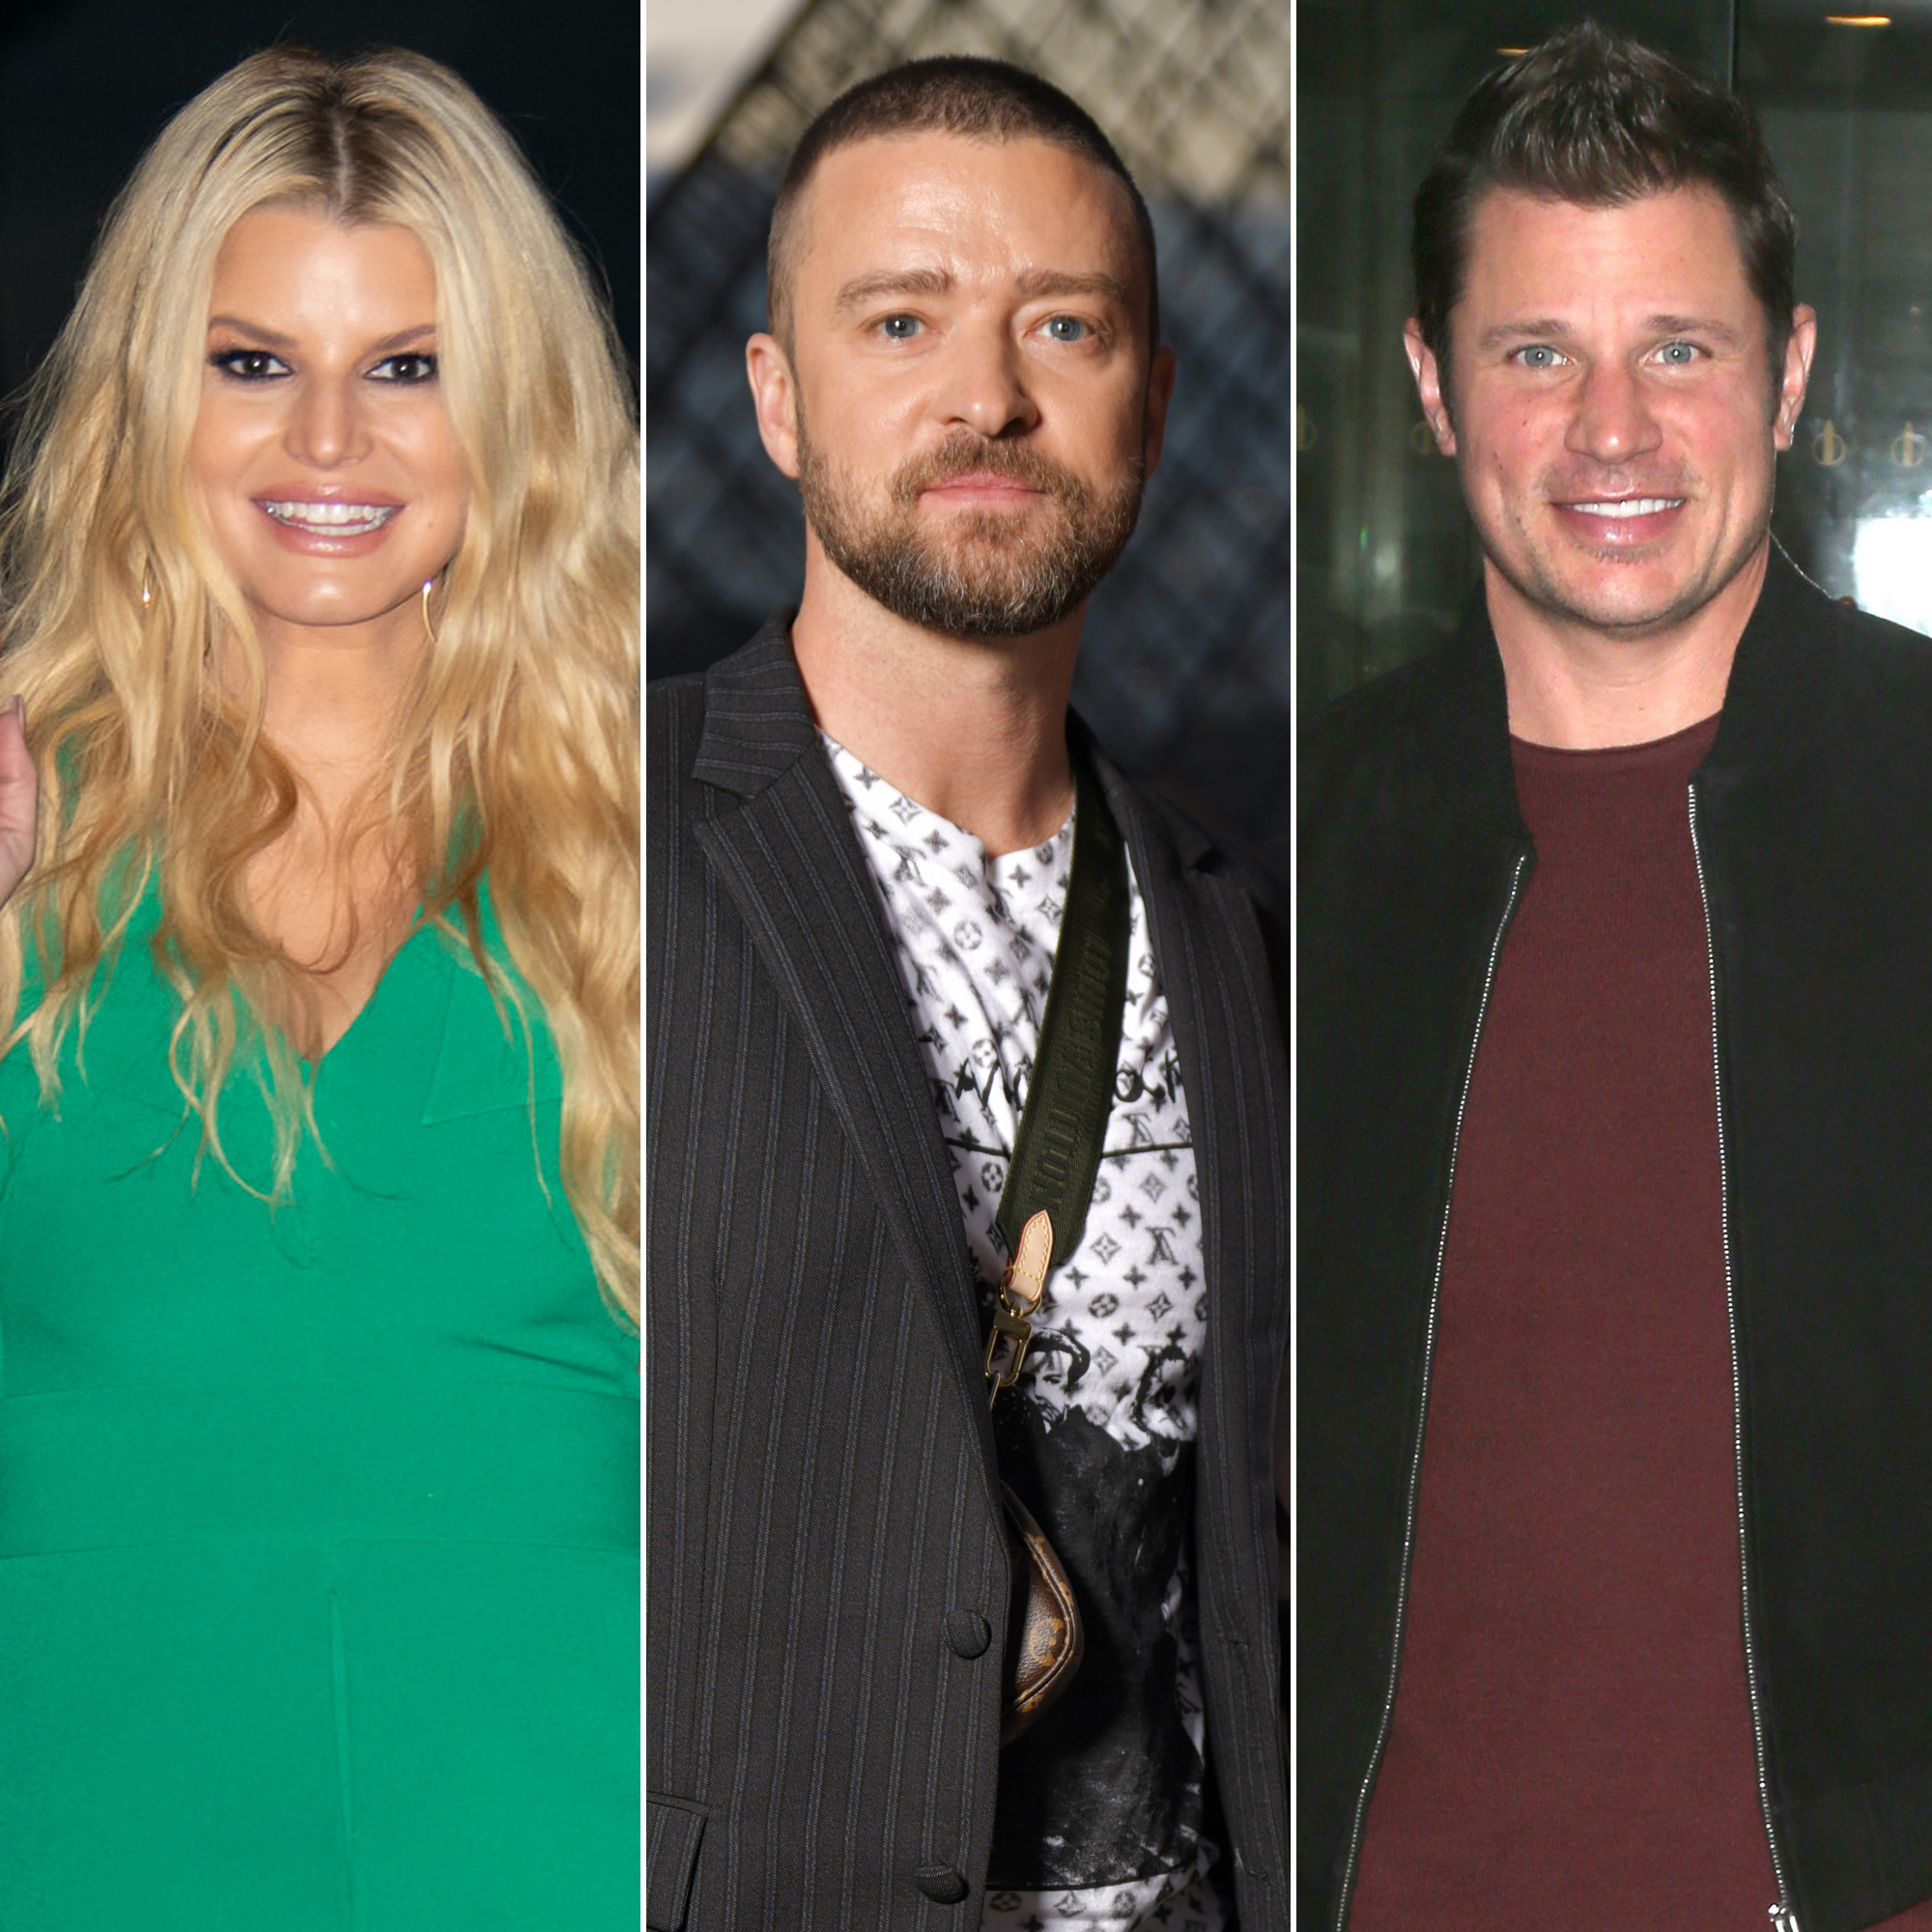 Jessica Simpson Reveals the Real Reason She Divorced Nick Lachey